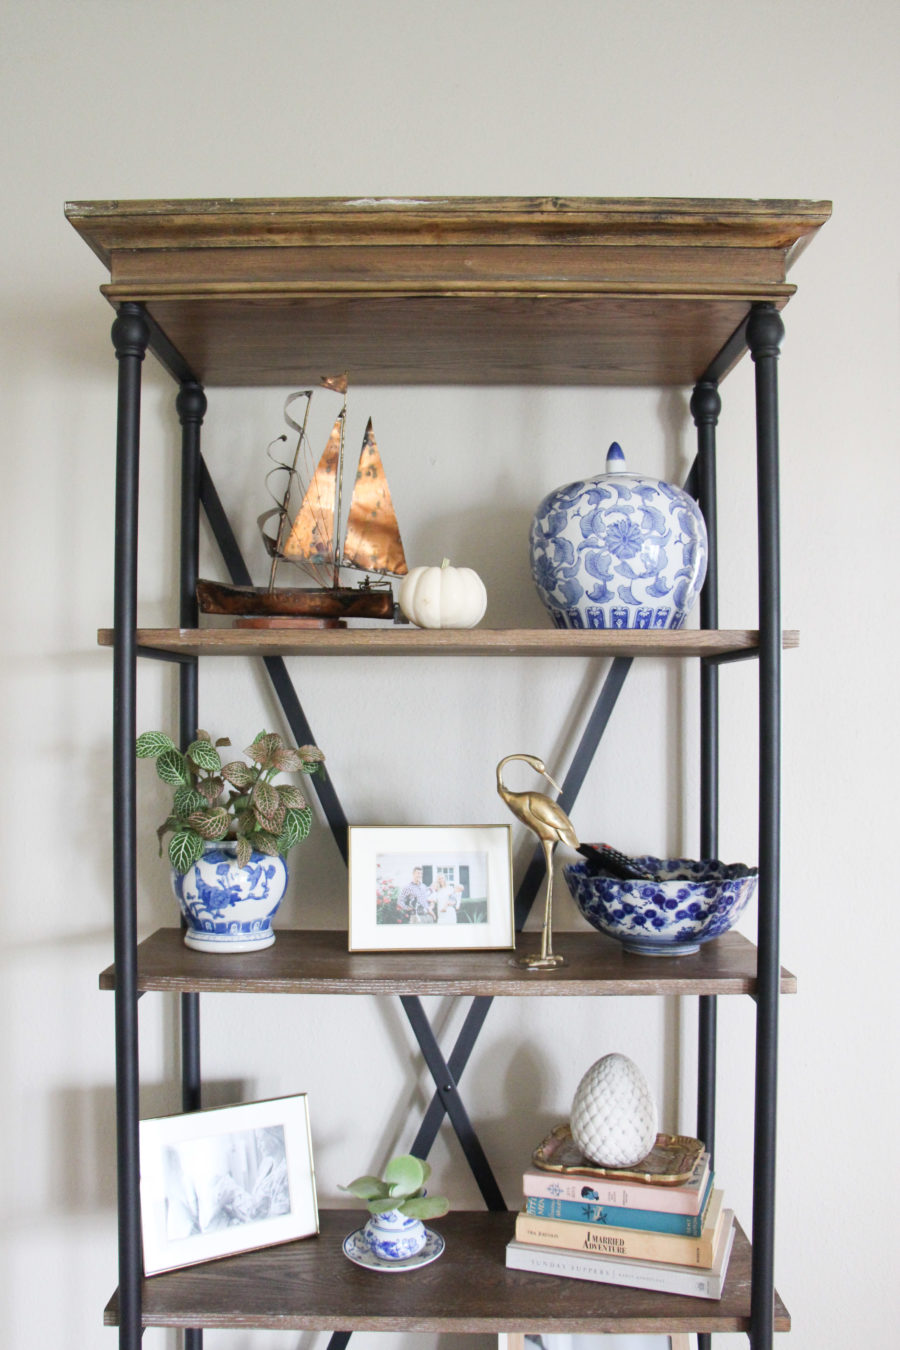 bookshelf styling with kids in mind